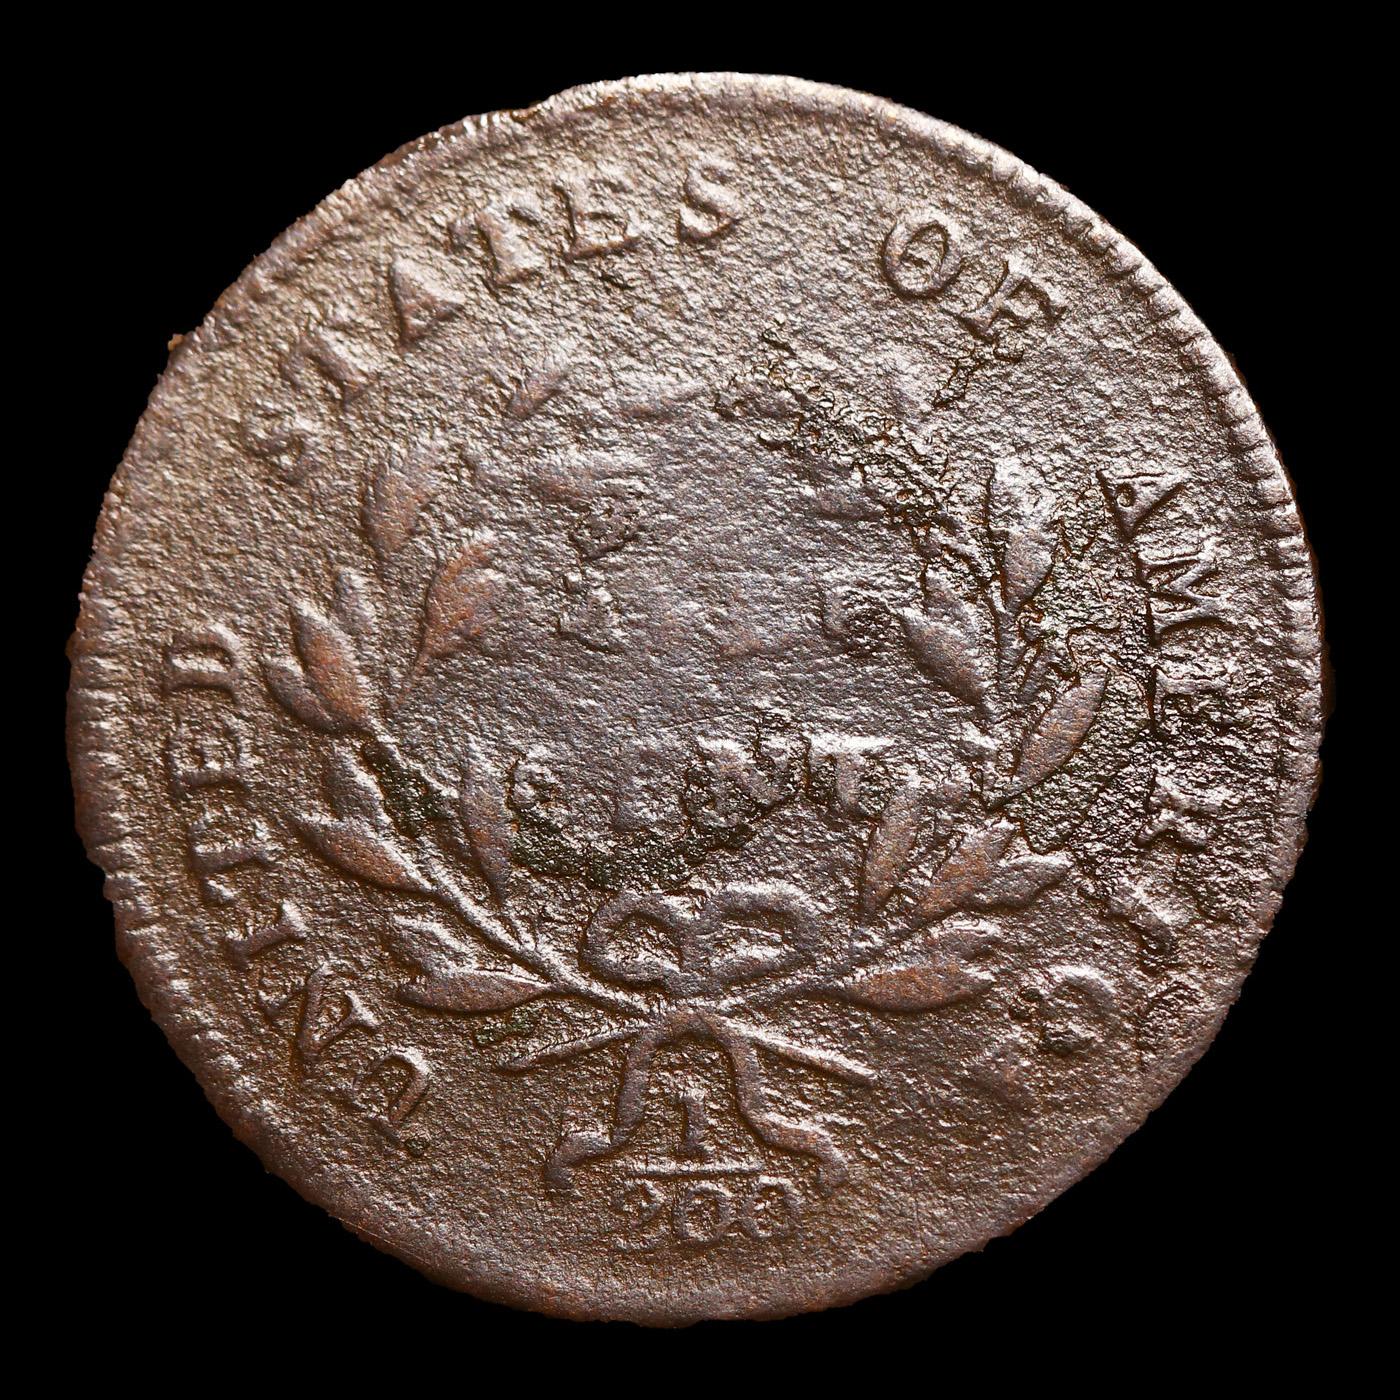 ***Auction Highlight*** 1797 1 Above 1 Liberty Cap half cent 1/2c Graded vg10 By SEGS (fc)